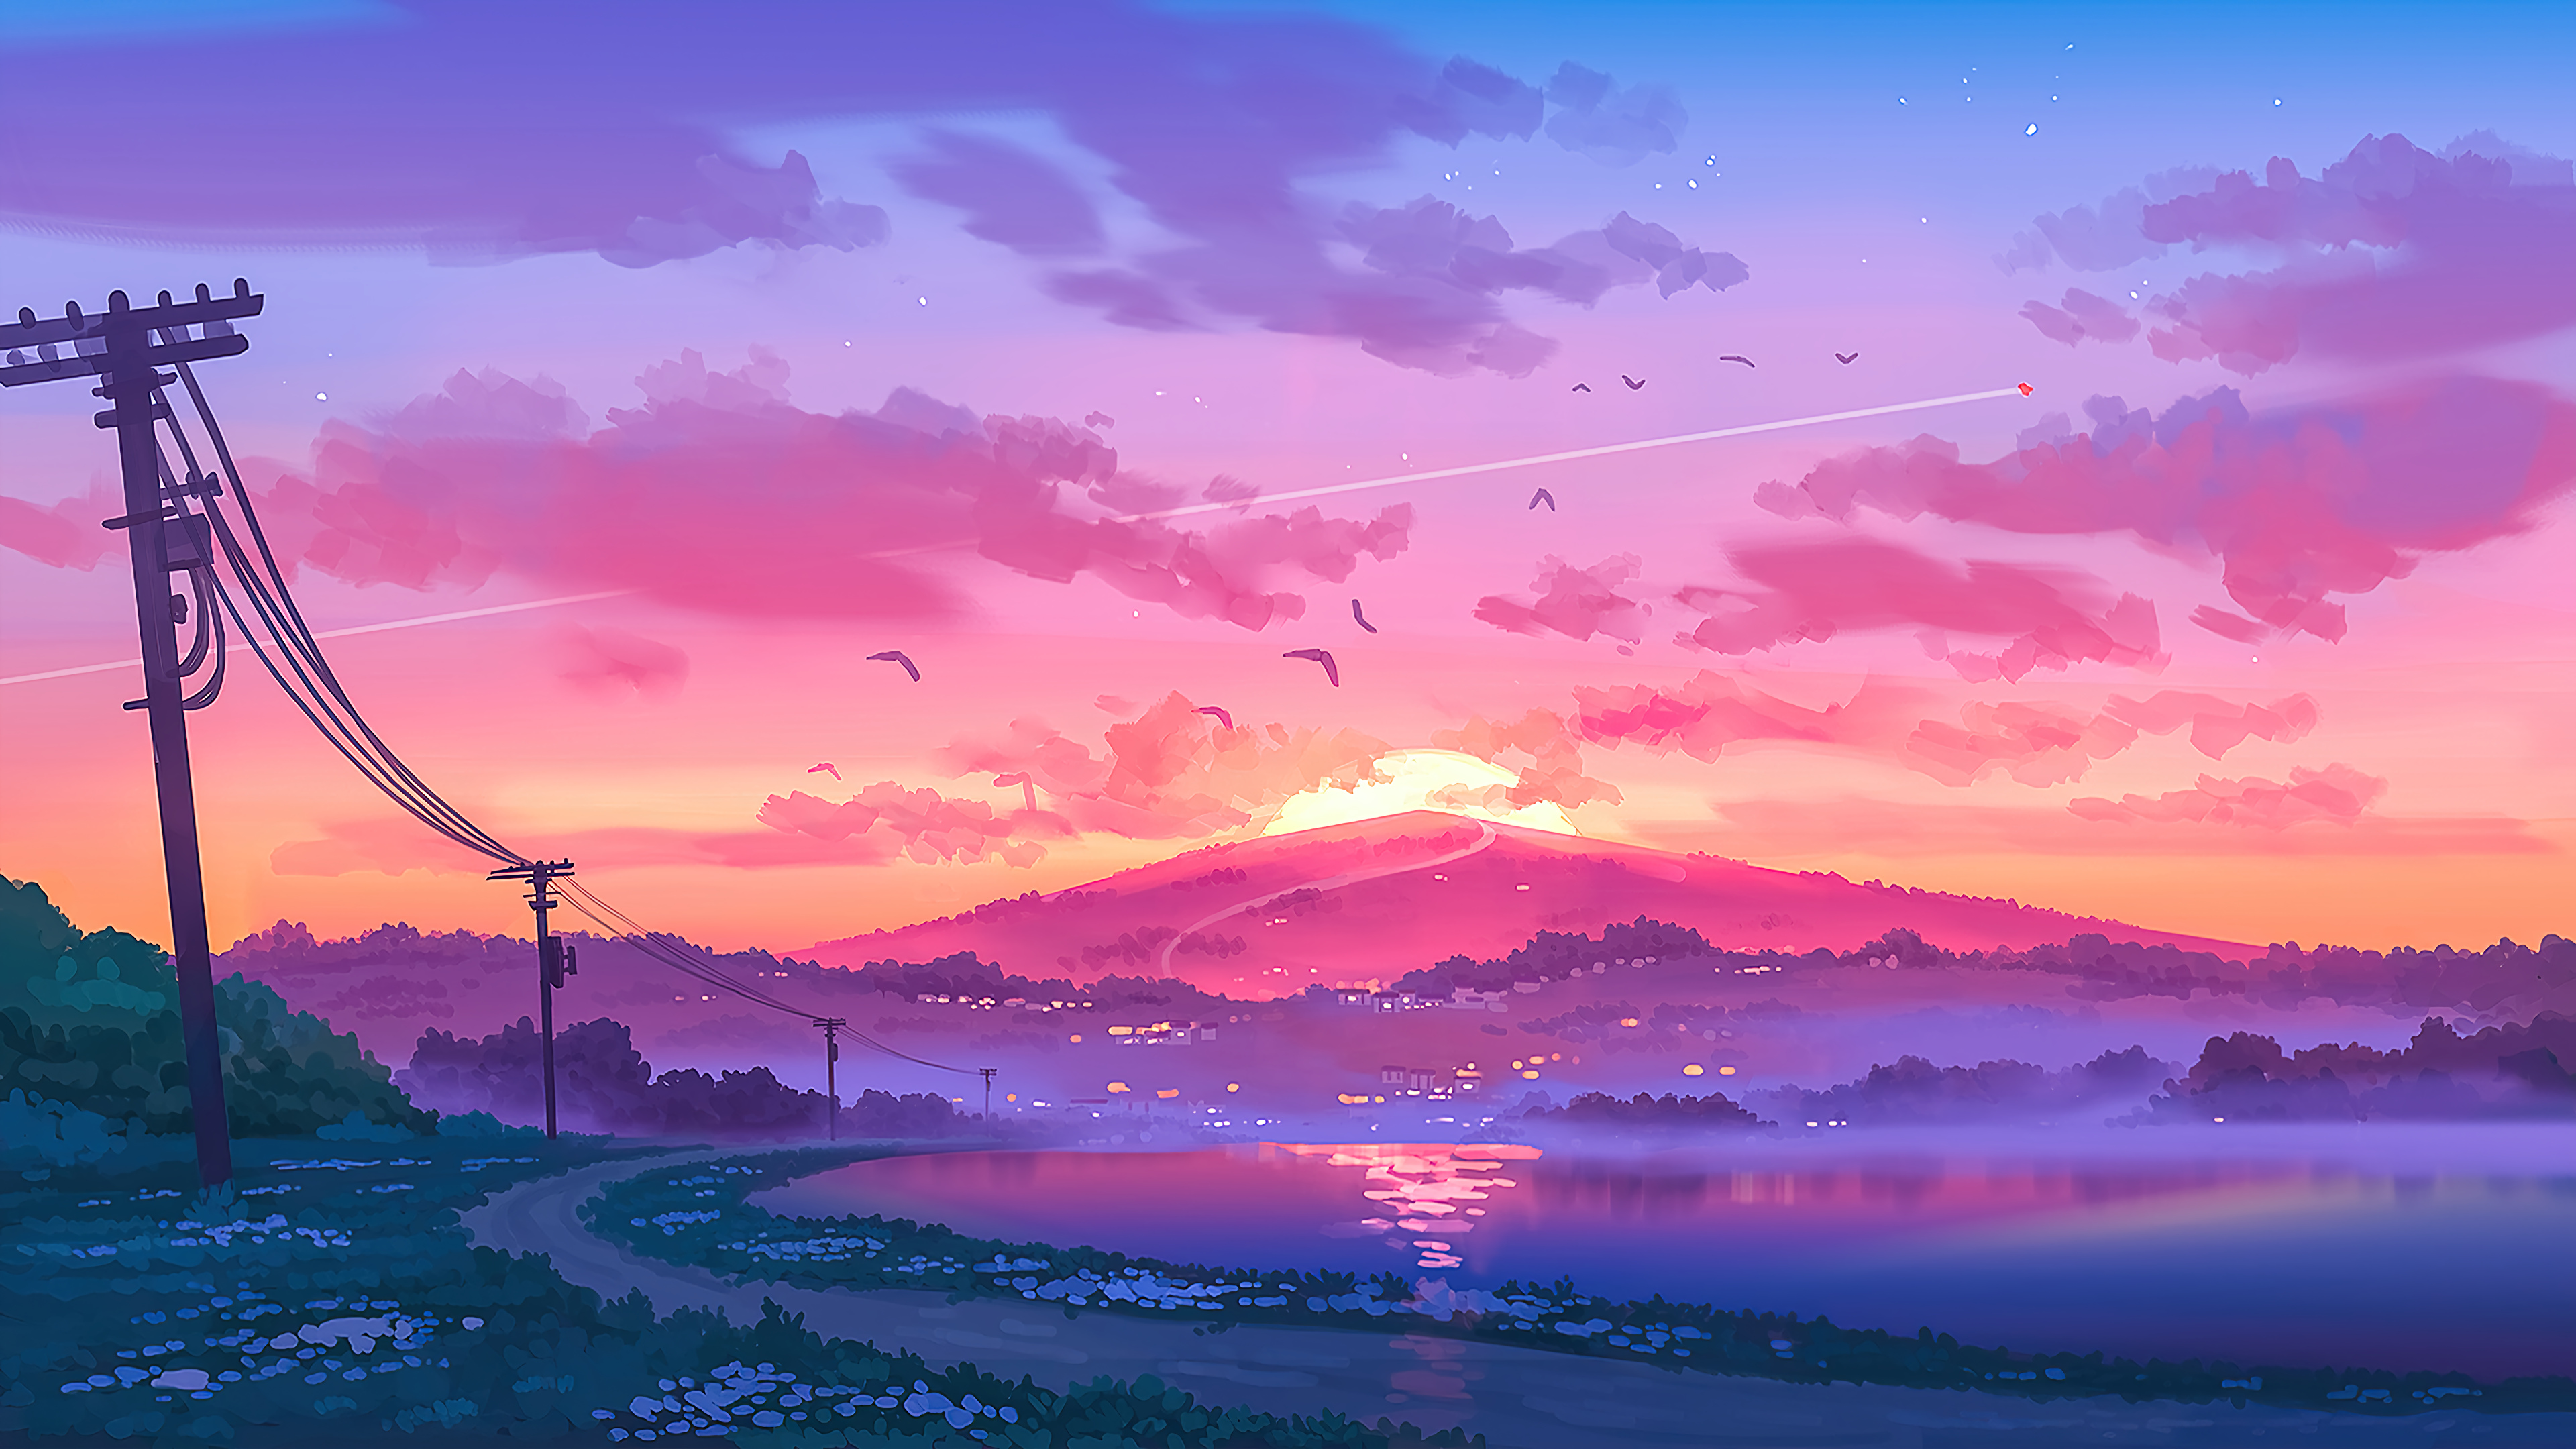 Sunset in the mountains Illustration Wallpaper 4k Ultra HD ID:6348